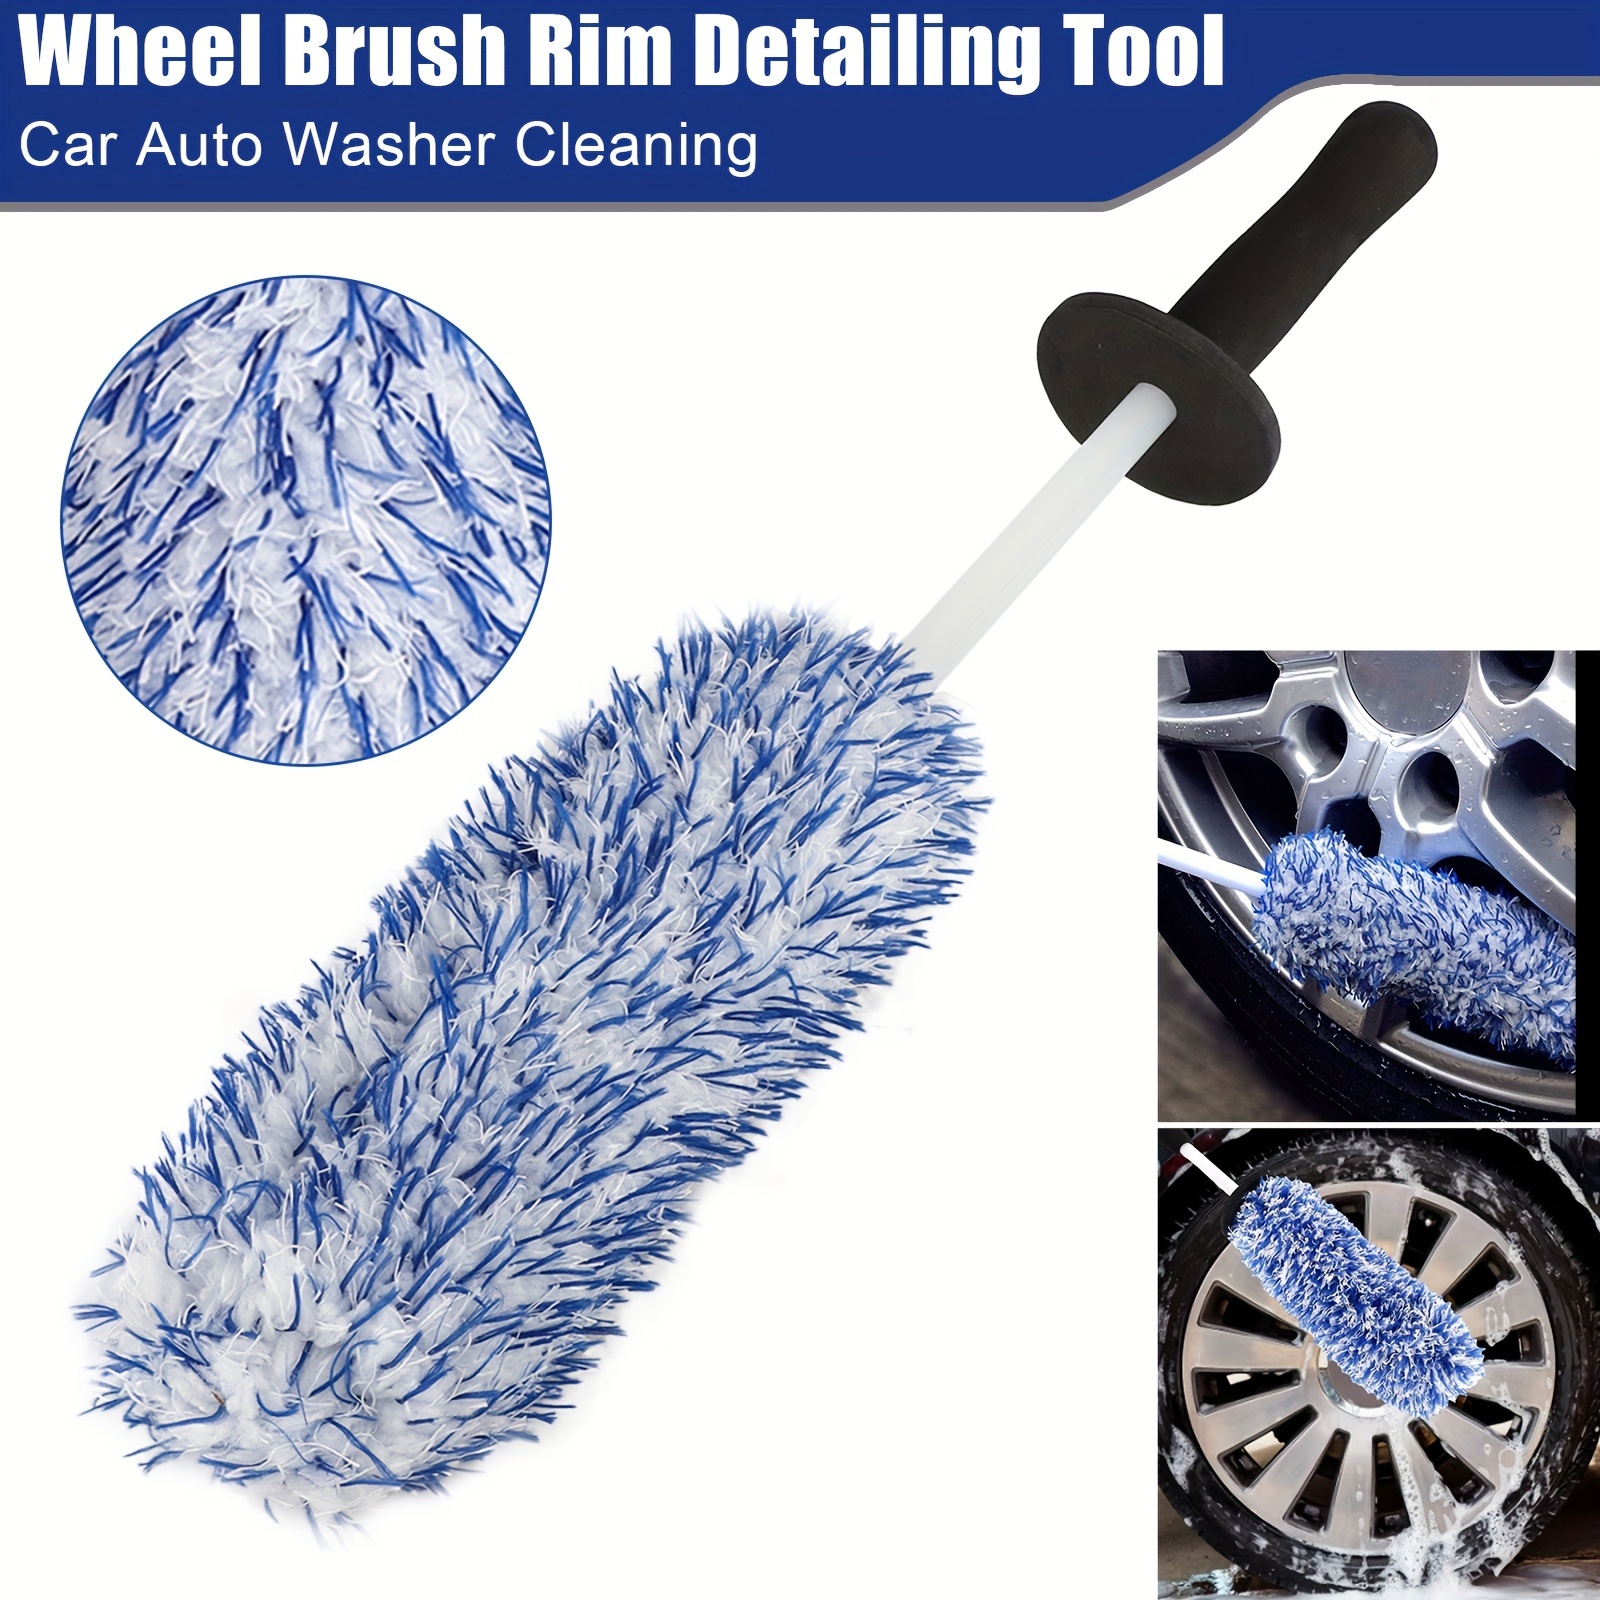 

17" Car Wheel Cleaning Brush Rims Tire Seat Engine Wash Auto Detailing Tool Kit For Auto Detailing Enthusiasts